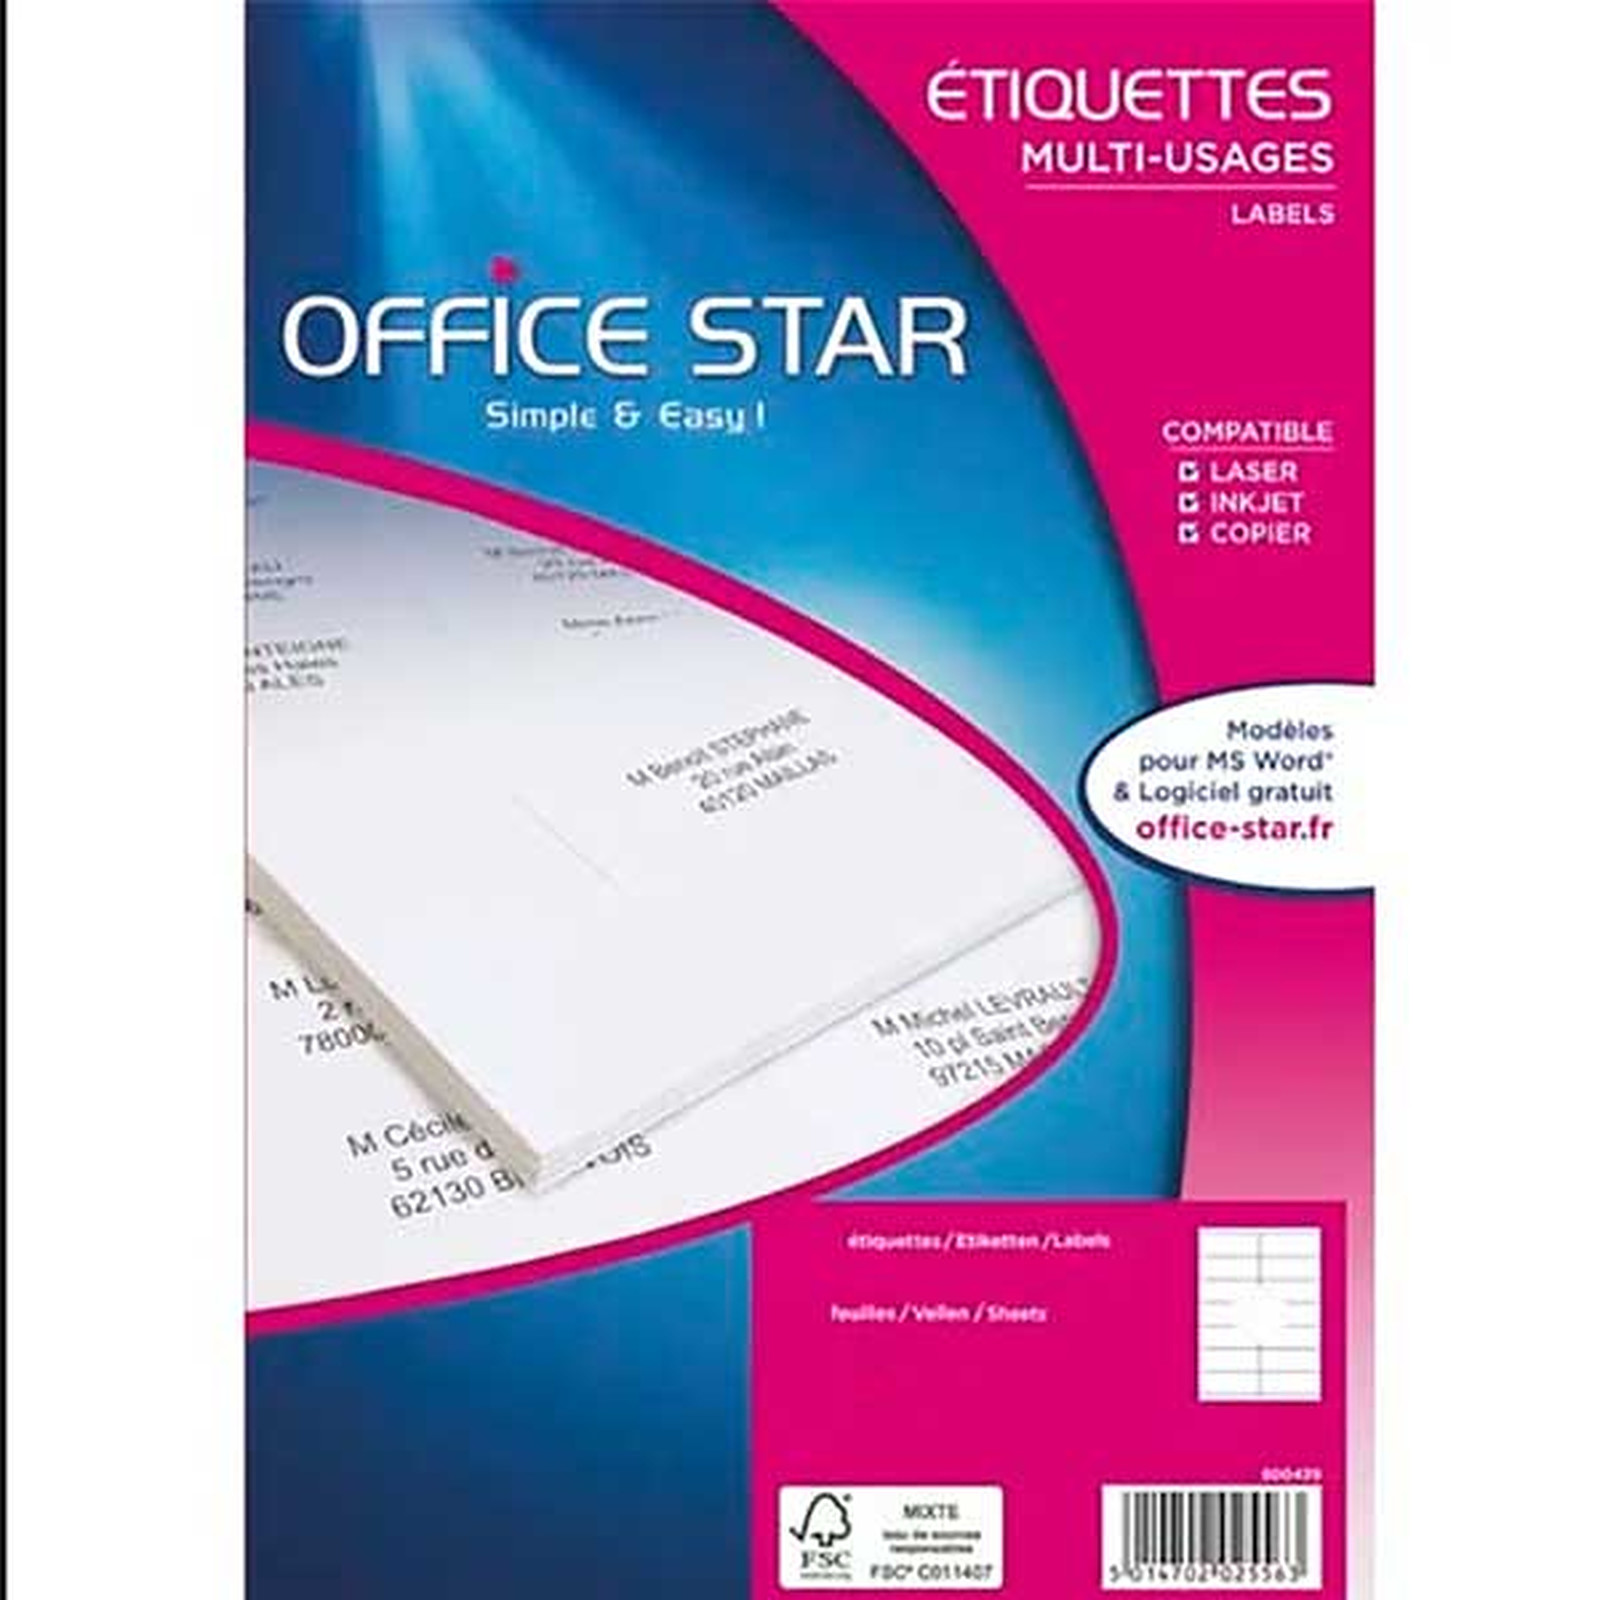 Office Star Etiquettes multi-usage blanches 105 x 42.4 mm x 1400 - Etiquette Office Star